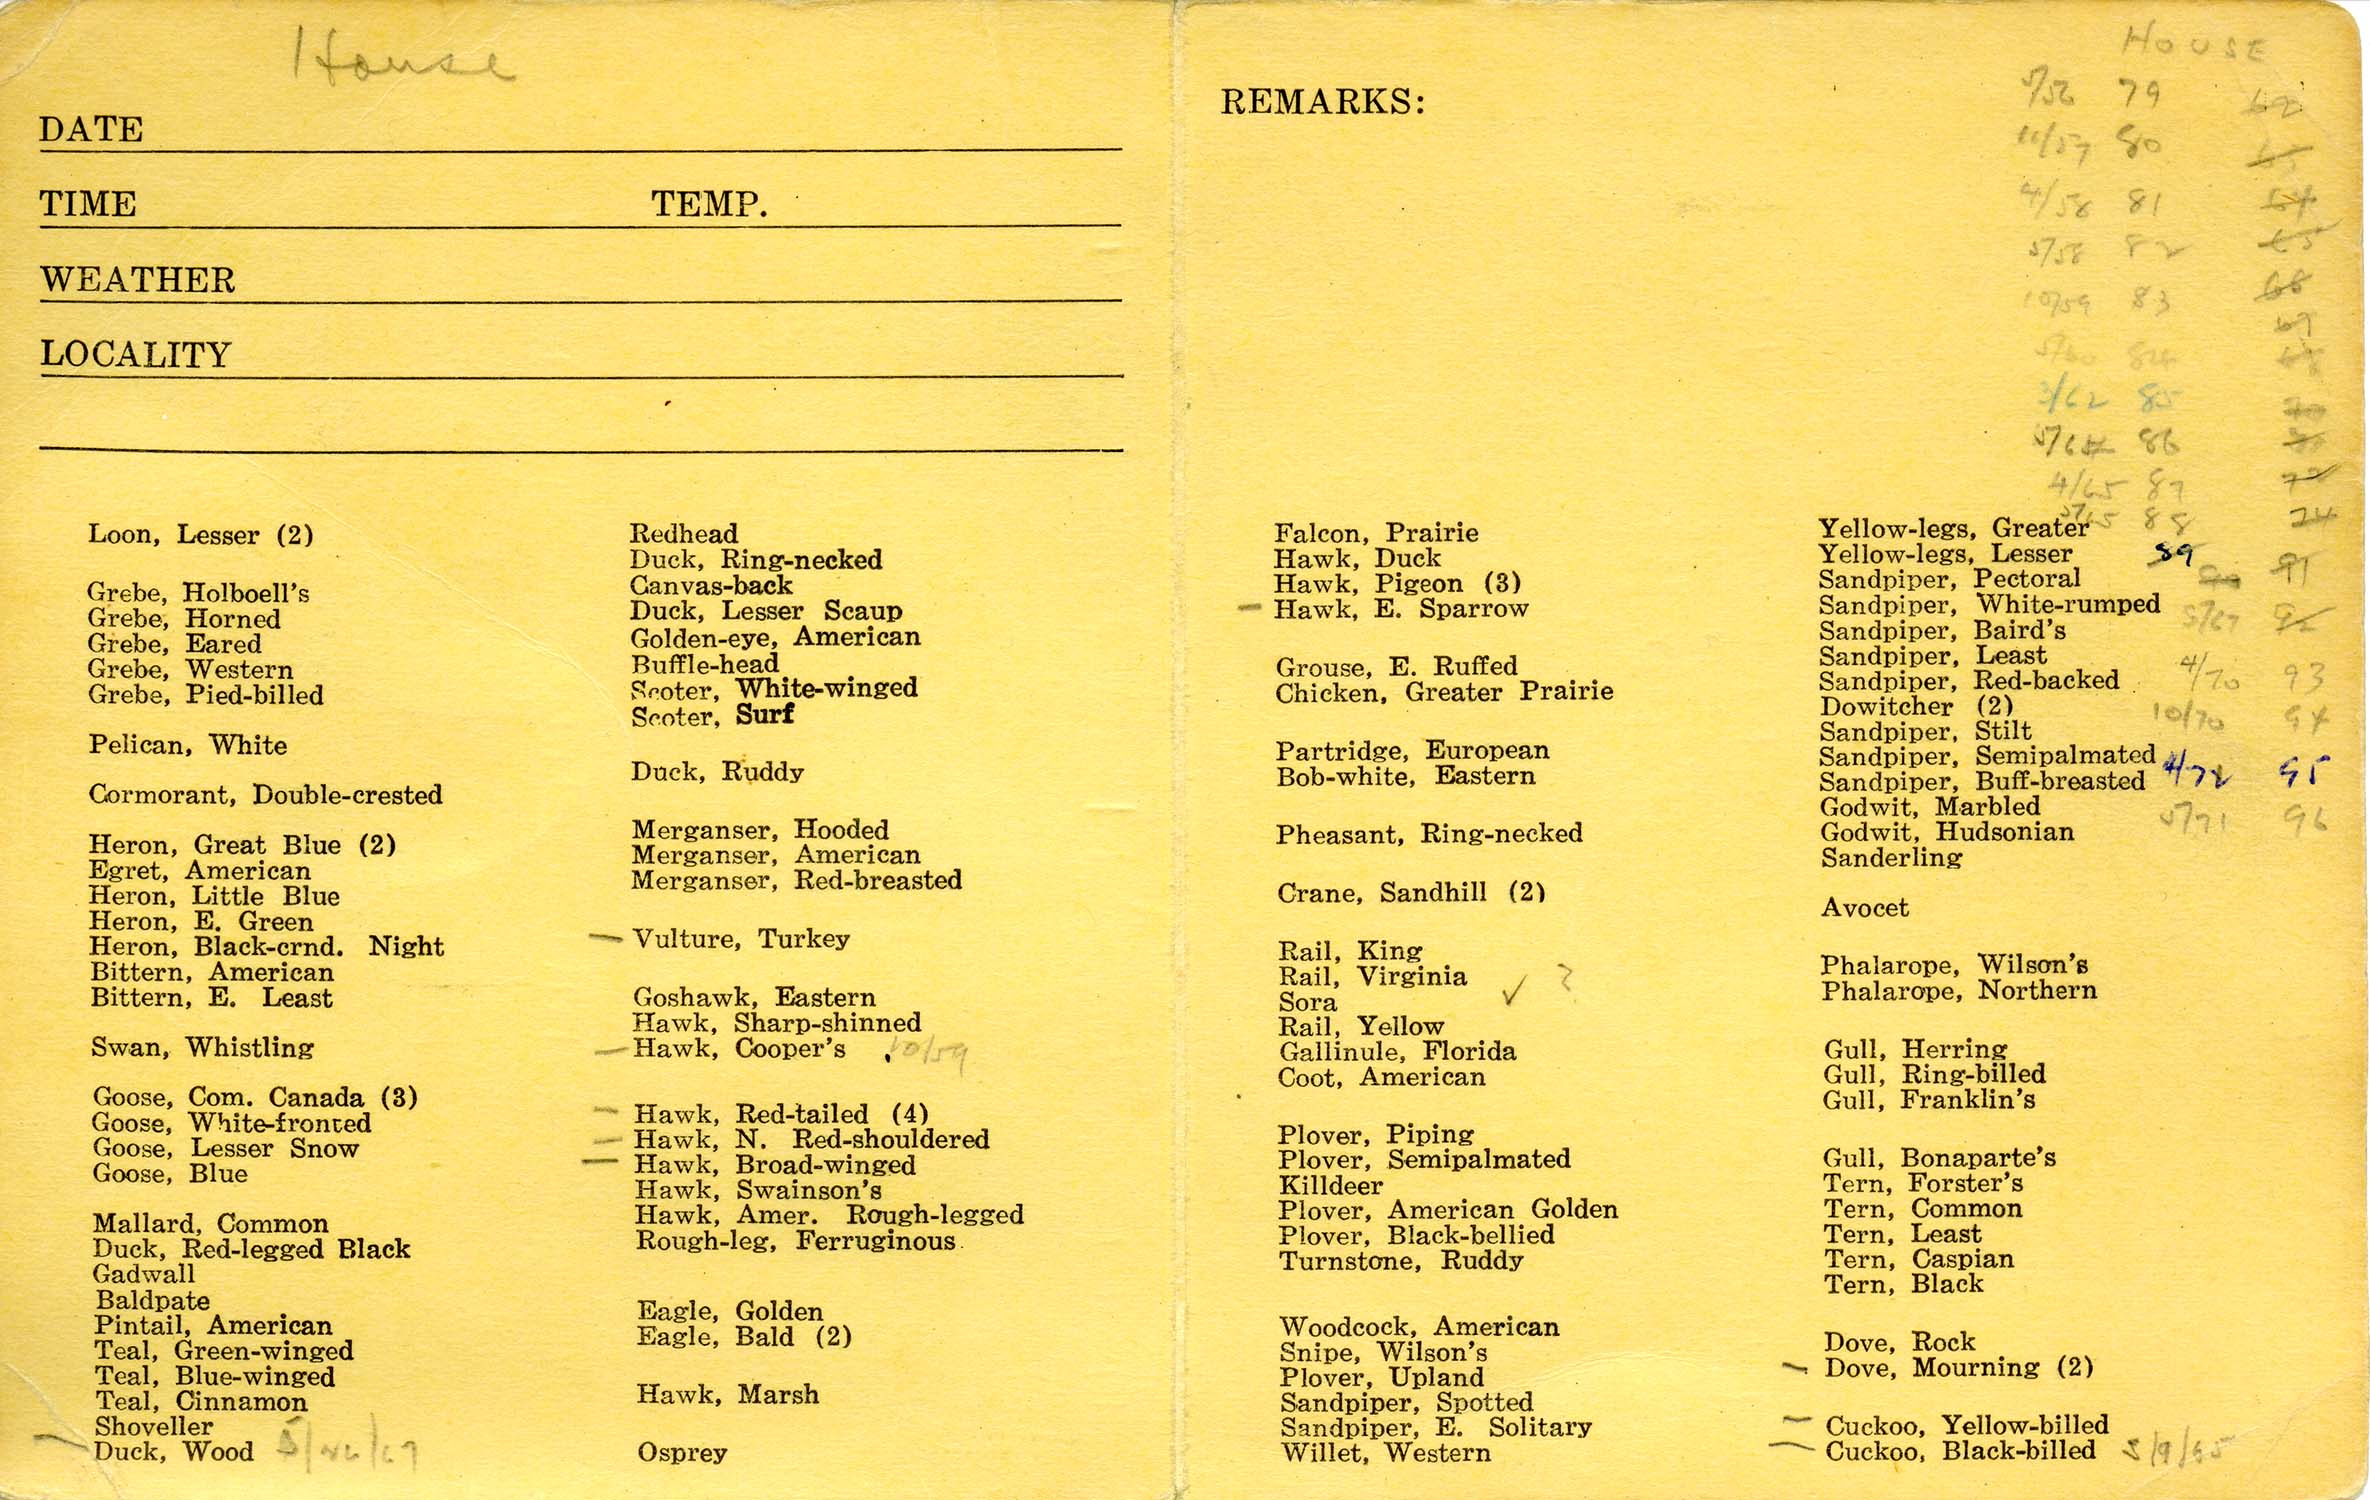 Bird checklist compiled by Woodward H. Brown covering 1948-1972